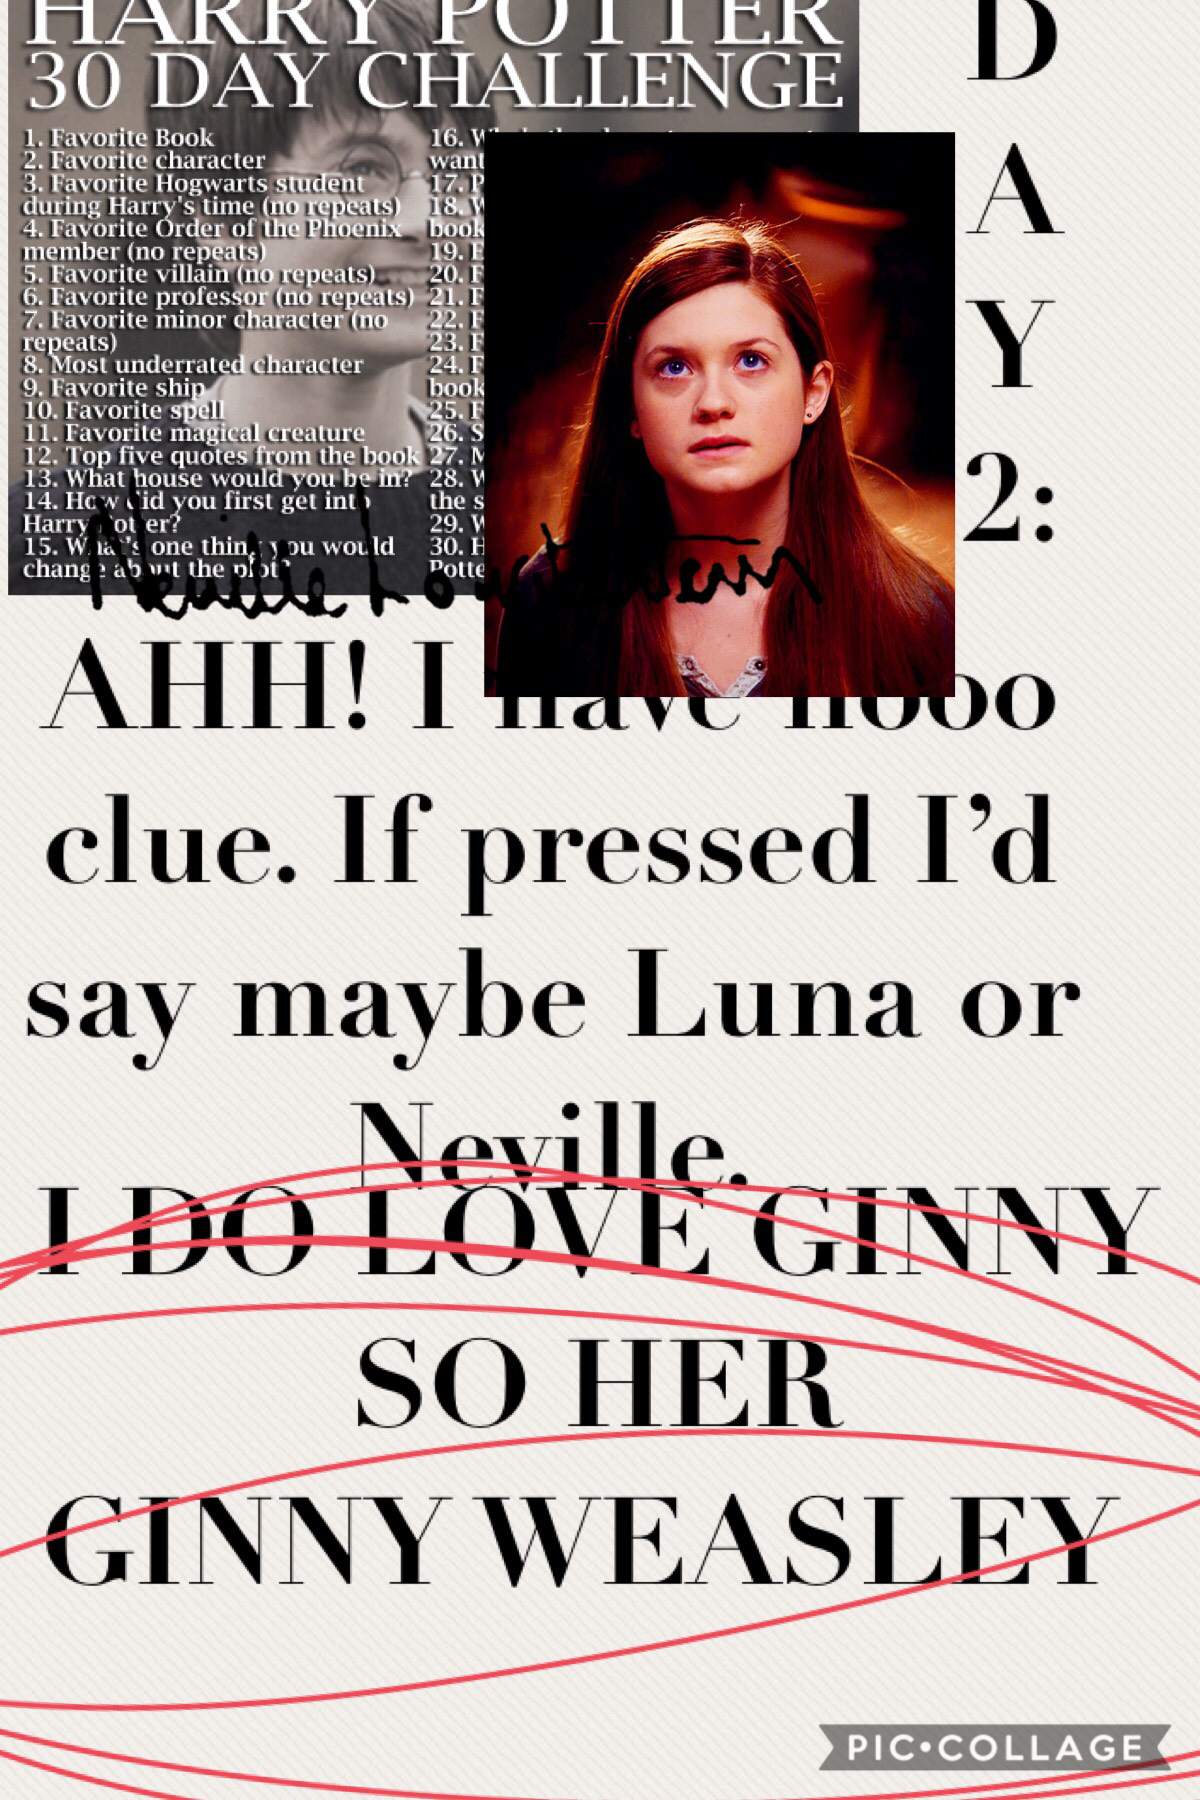 lol this is my thinking but I LOVE GINNY OK? So Ginny is my choice for DAY 2!